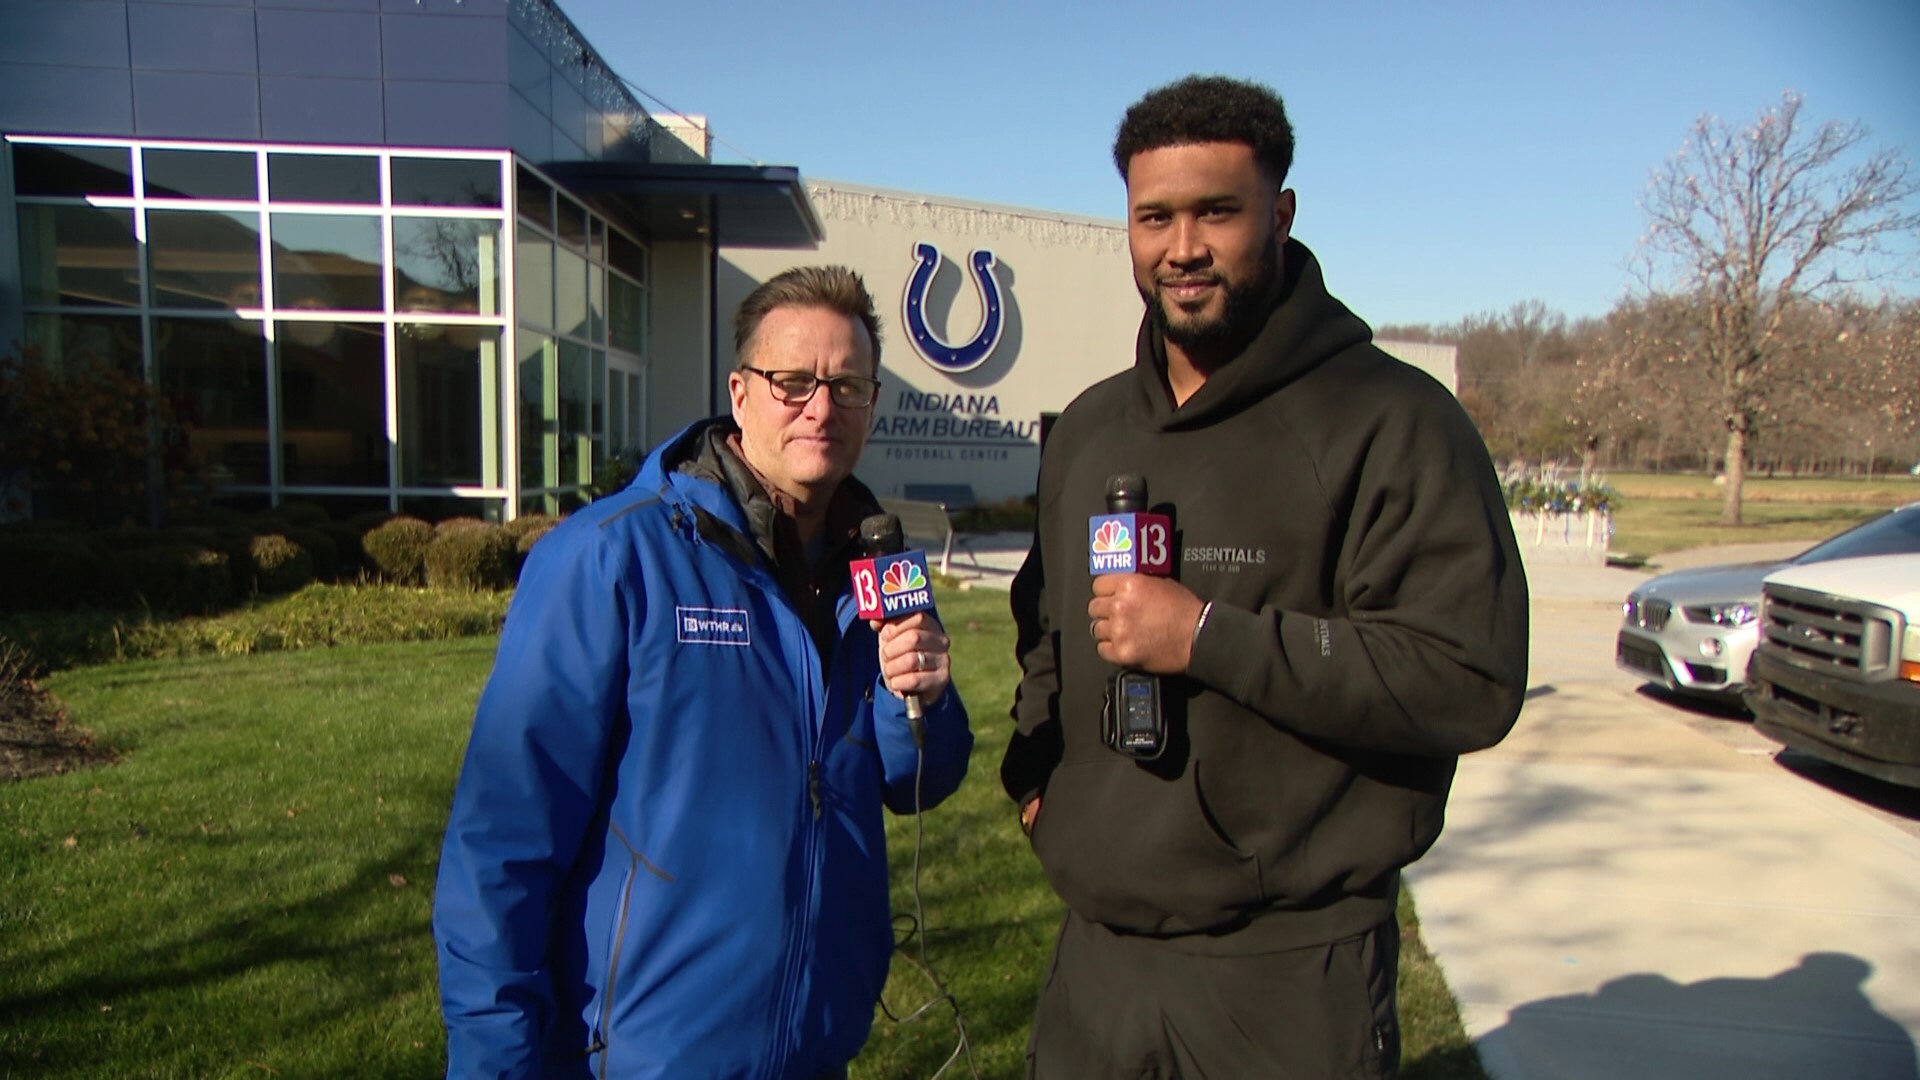 13Sports director Dave Calabro and Indianapolis Colts DE DeForest Buckner break down the Colts win over the Buccaneers and what it means for their playoff hopes.